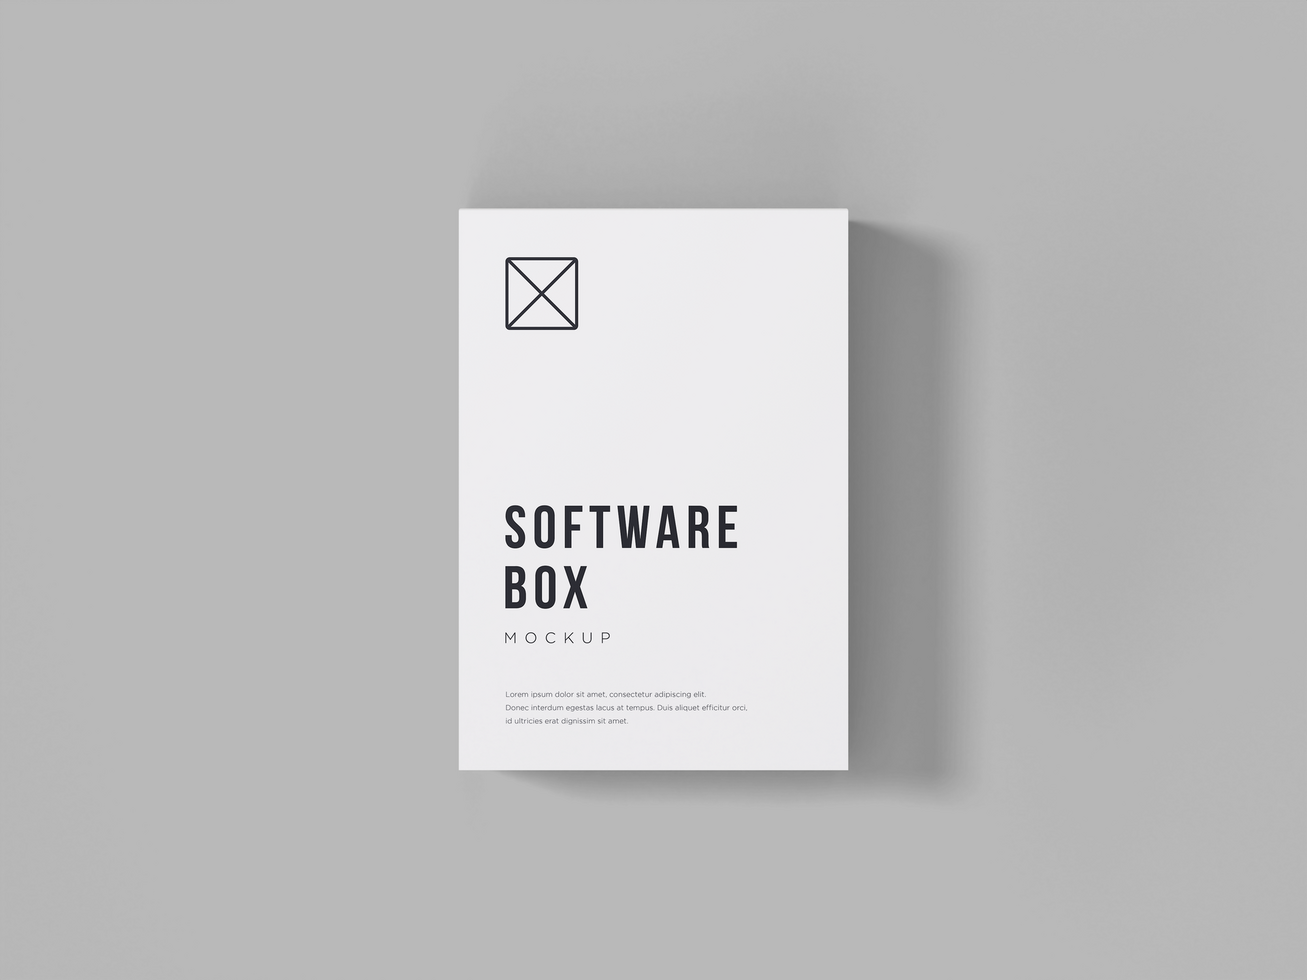 Changeable Product Cardboard Package Box design - Software Box 3D Rendering Mockup psd